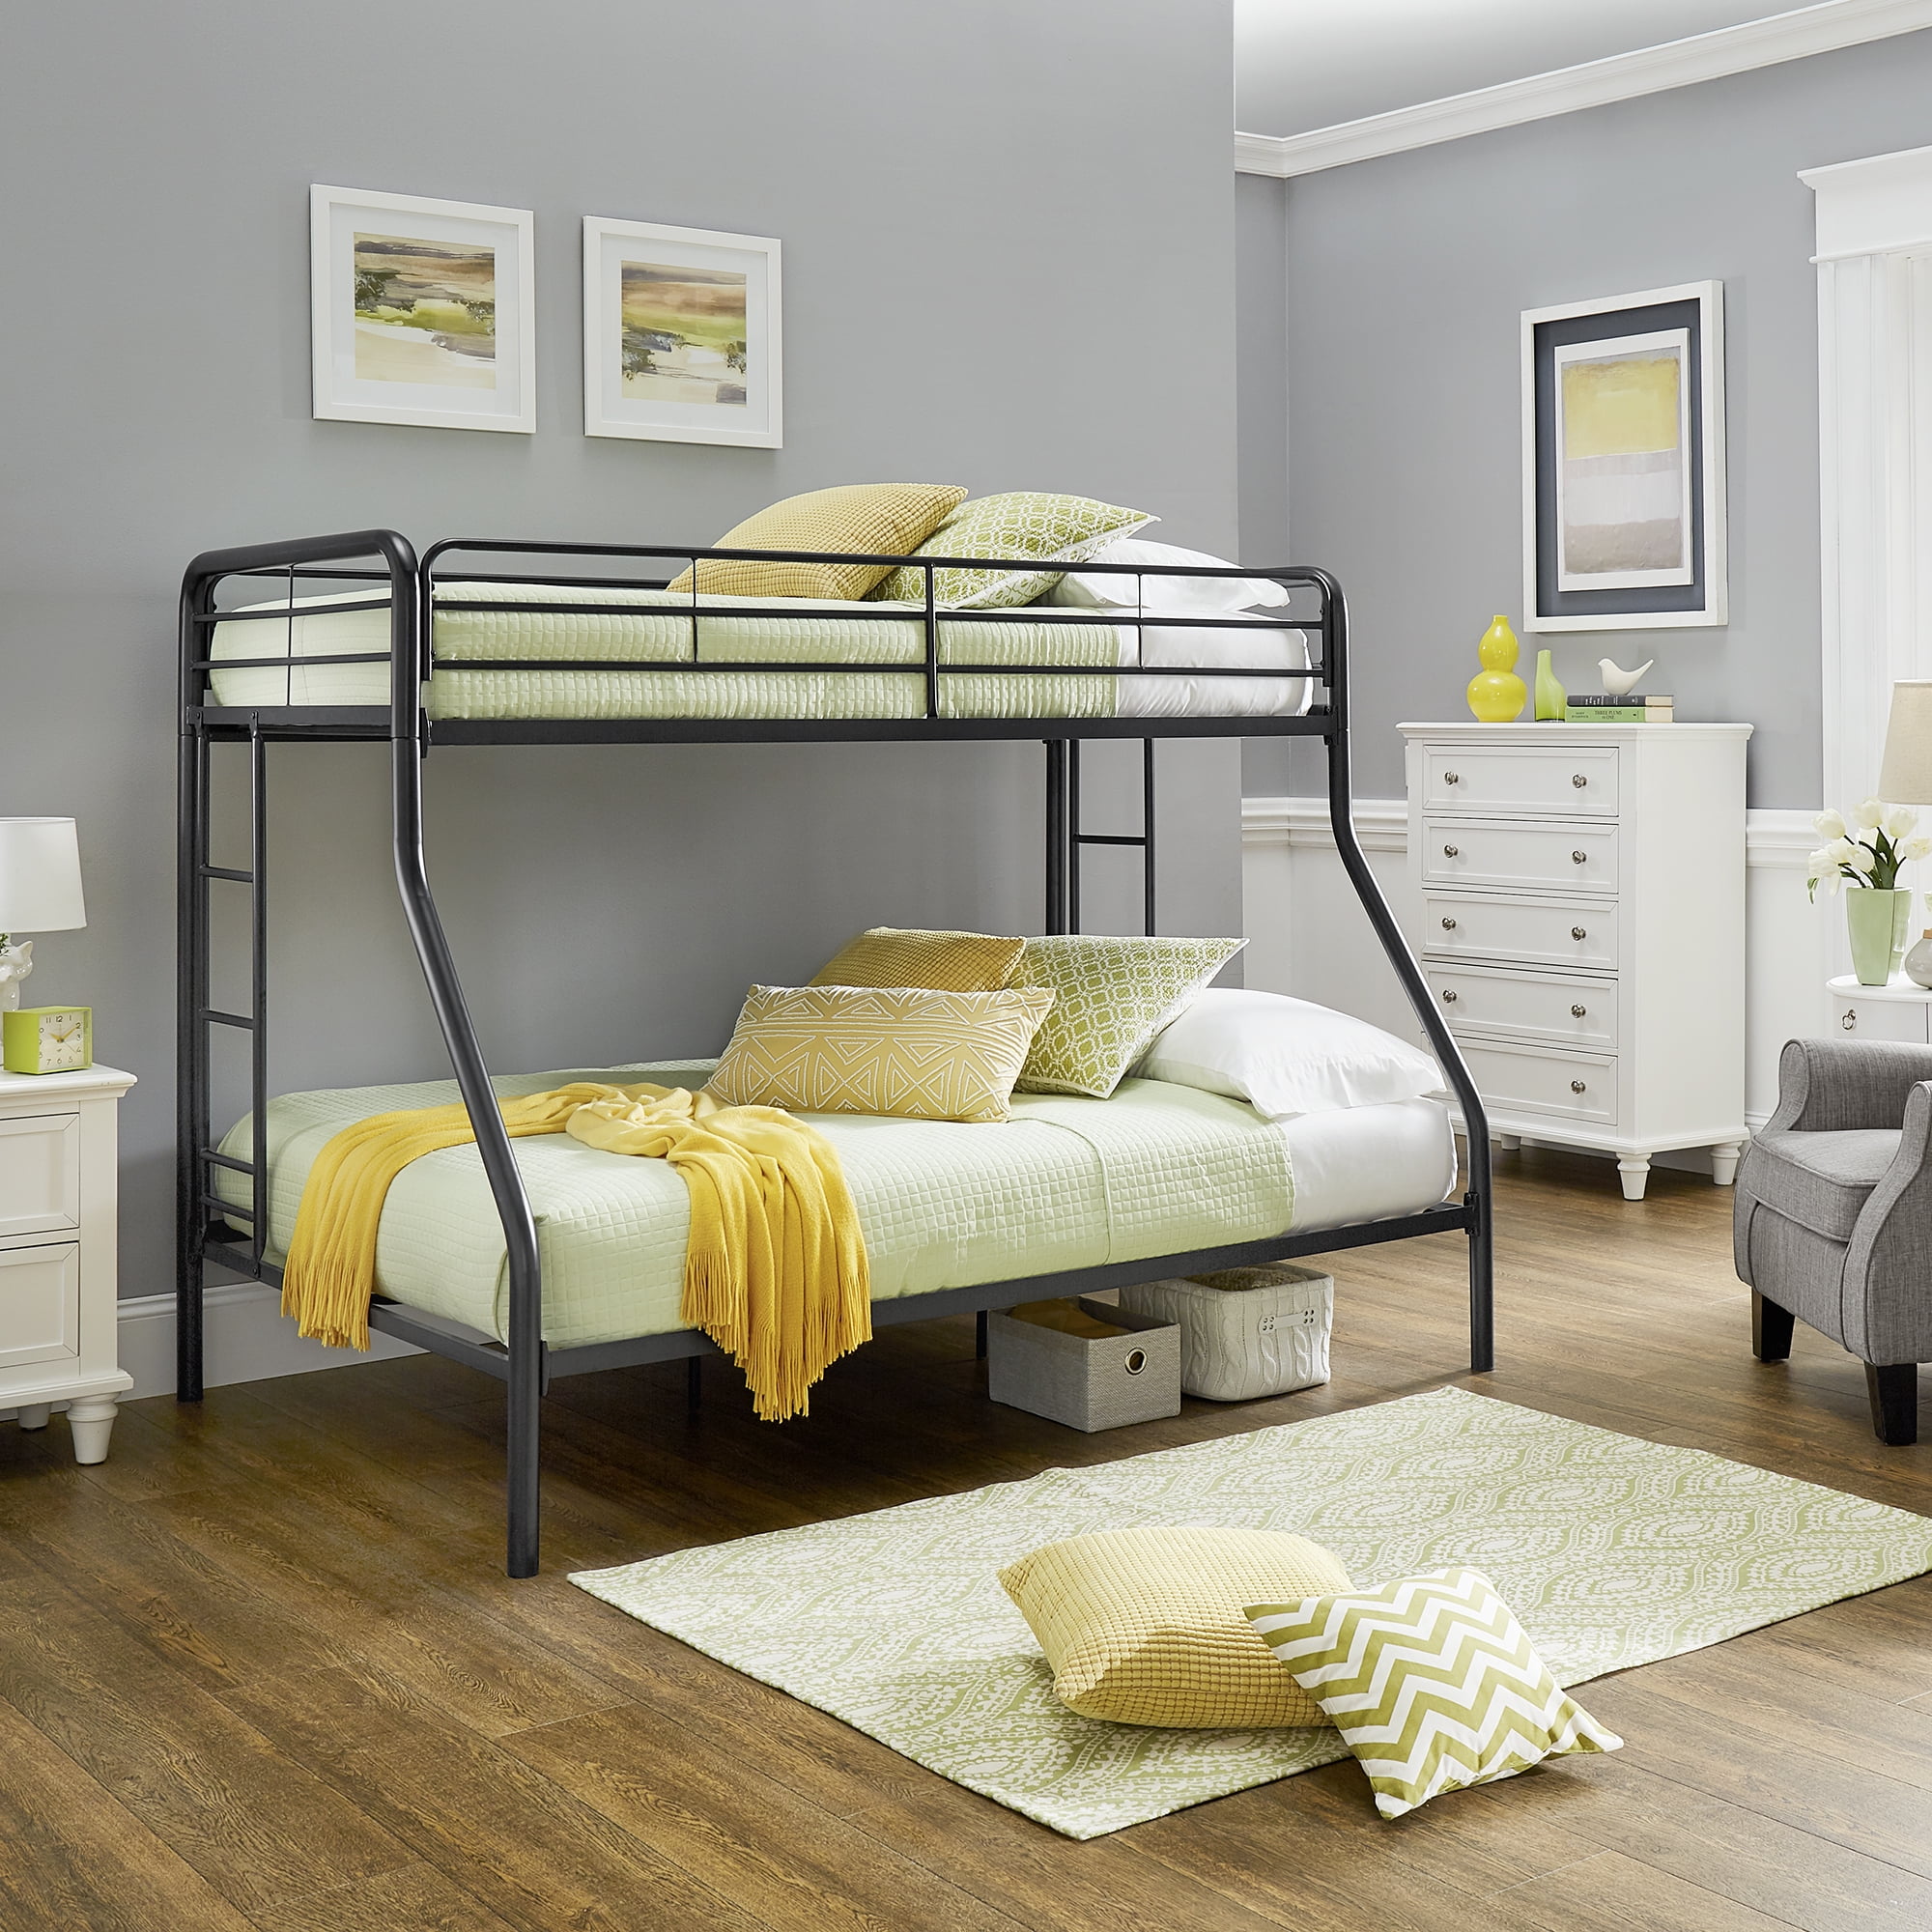 Mainstays Small Space Junior Twin Over, Sam’s Club Bunk Beds